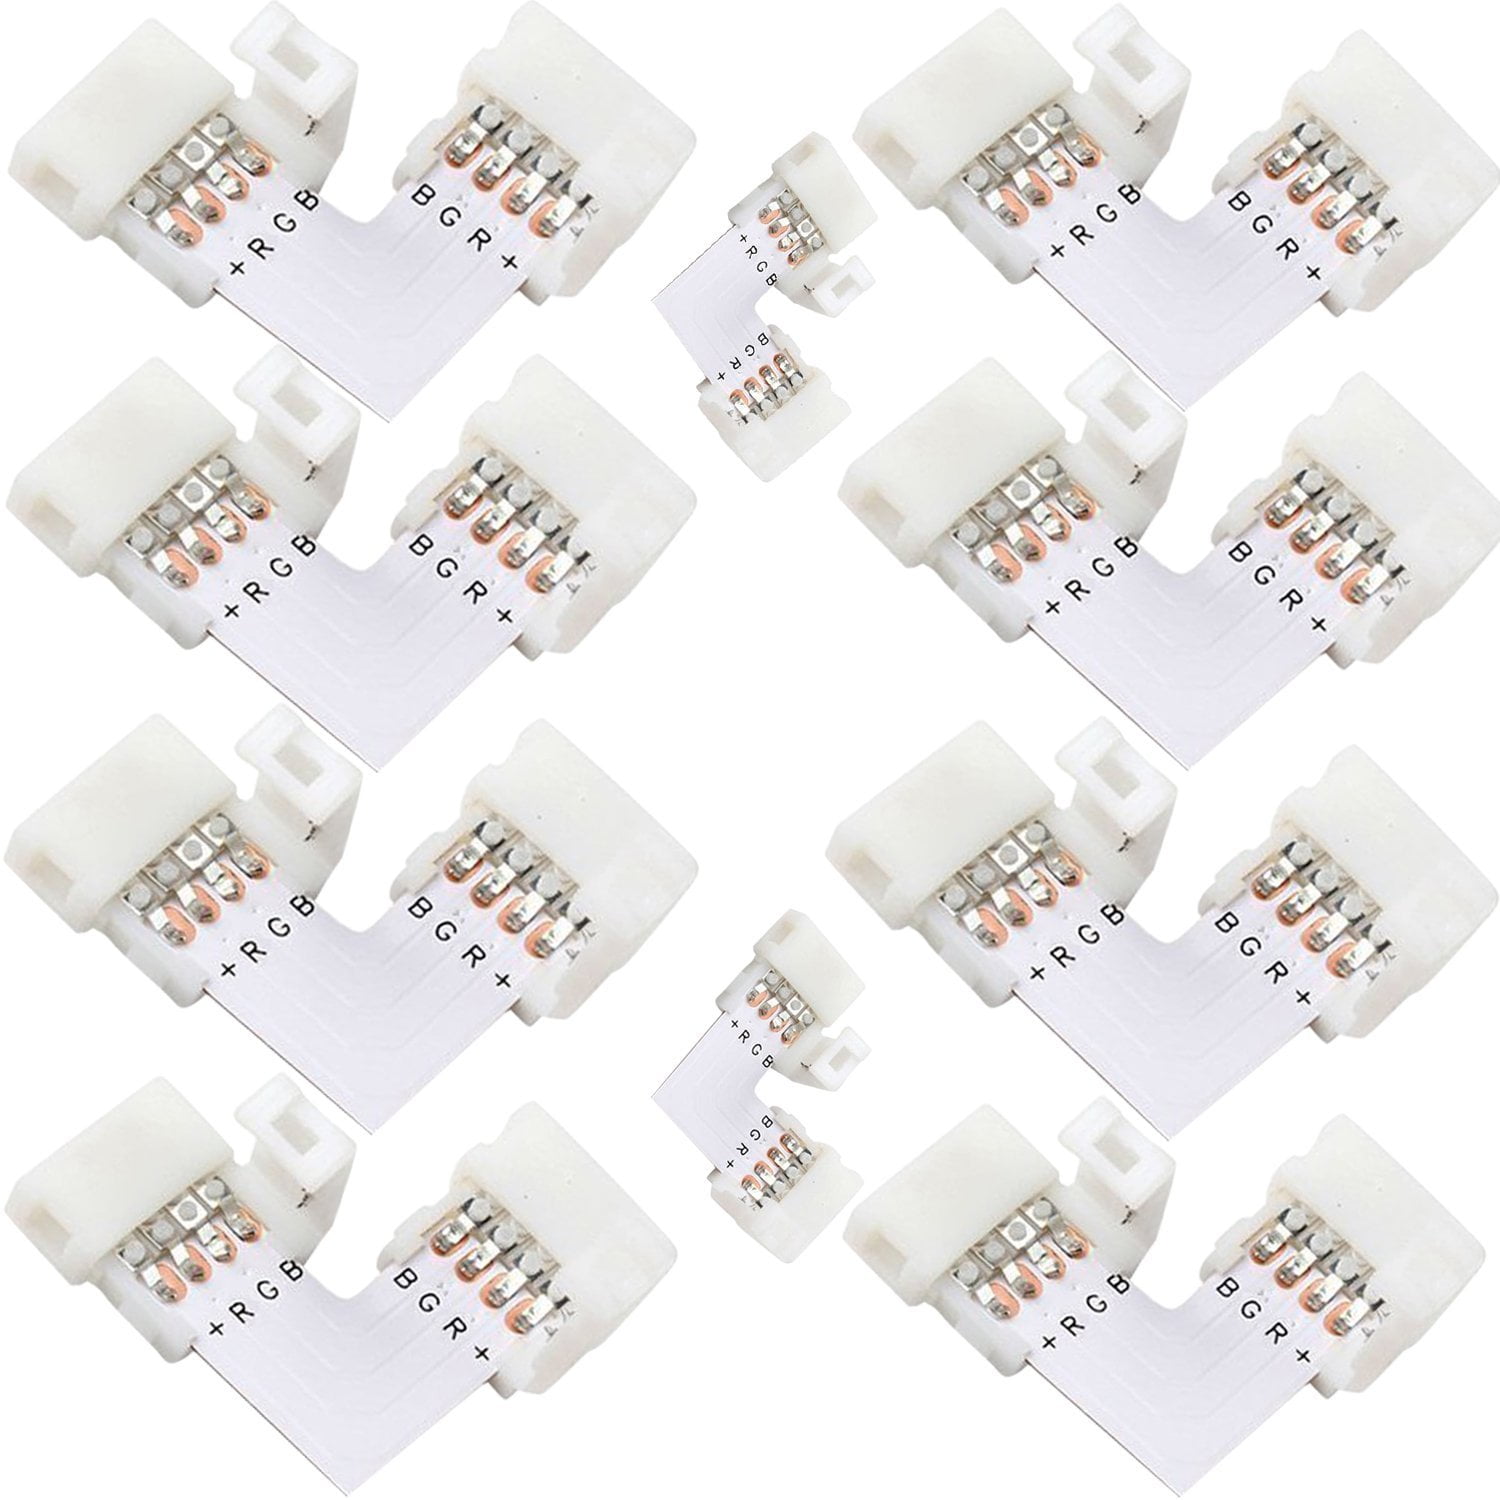 10 Pcs 10mm 4 PIN RGB LED Connector Solderless Adapter for 5050 SMD Strip Light 